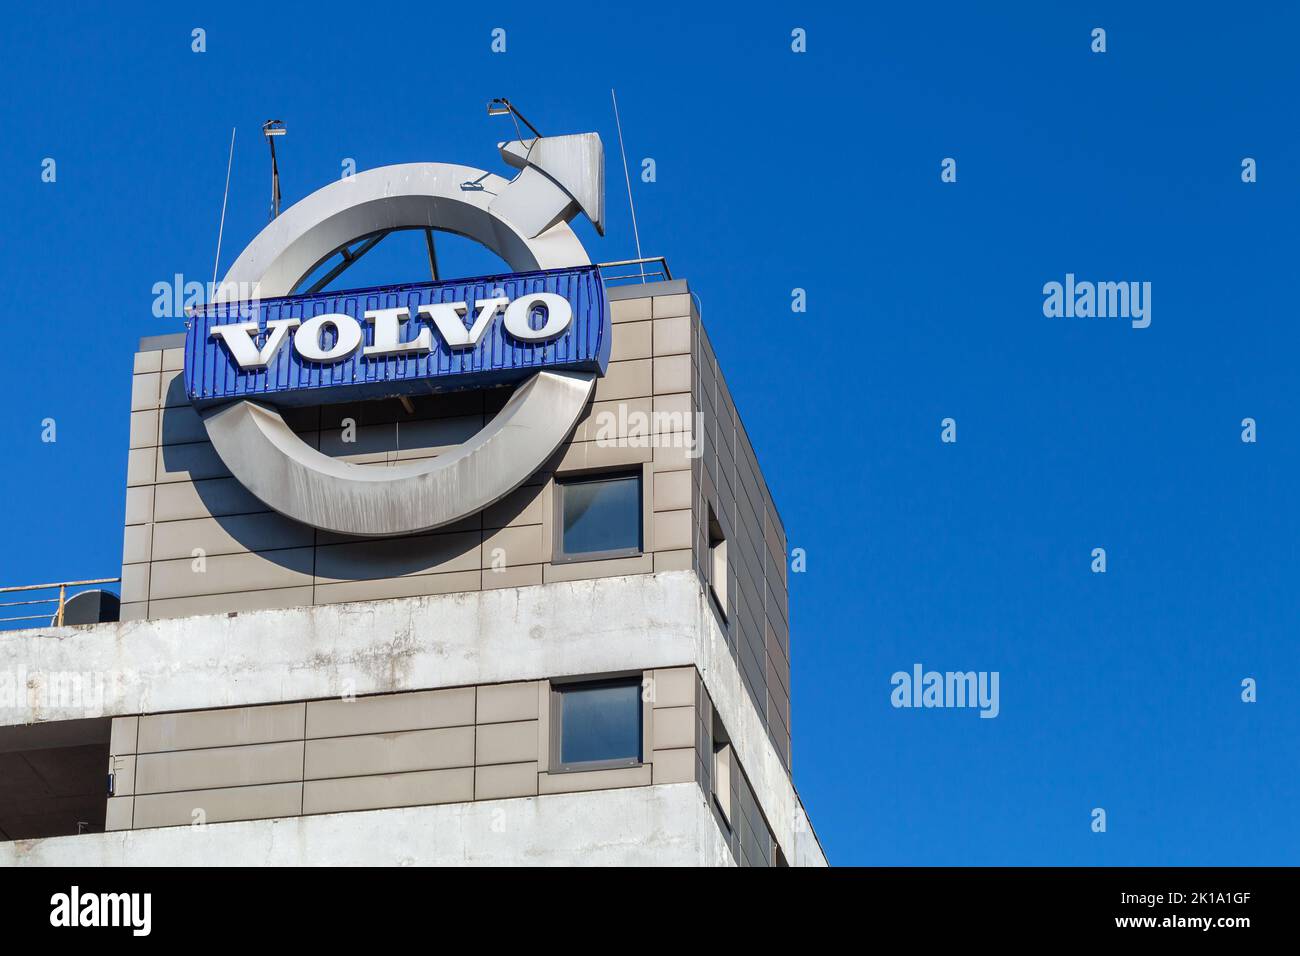 St. Petersburg, Russia - August 09, 2022: Volvo cars logotype mounted on a car retail center facade Stock Photo